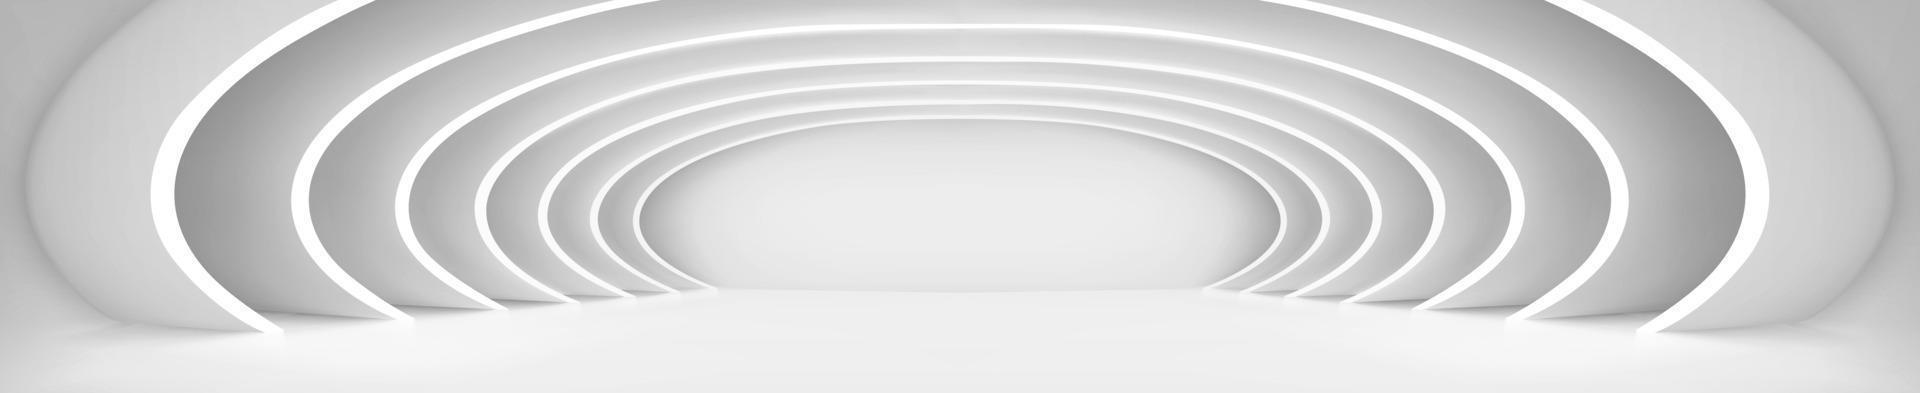 Abstract white tunnel under multiple round arches vector